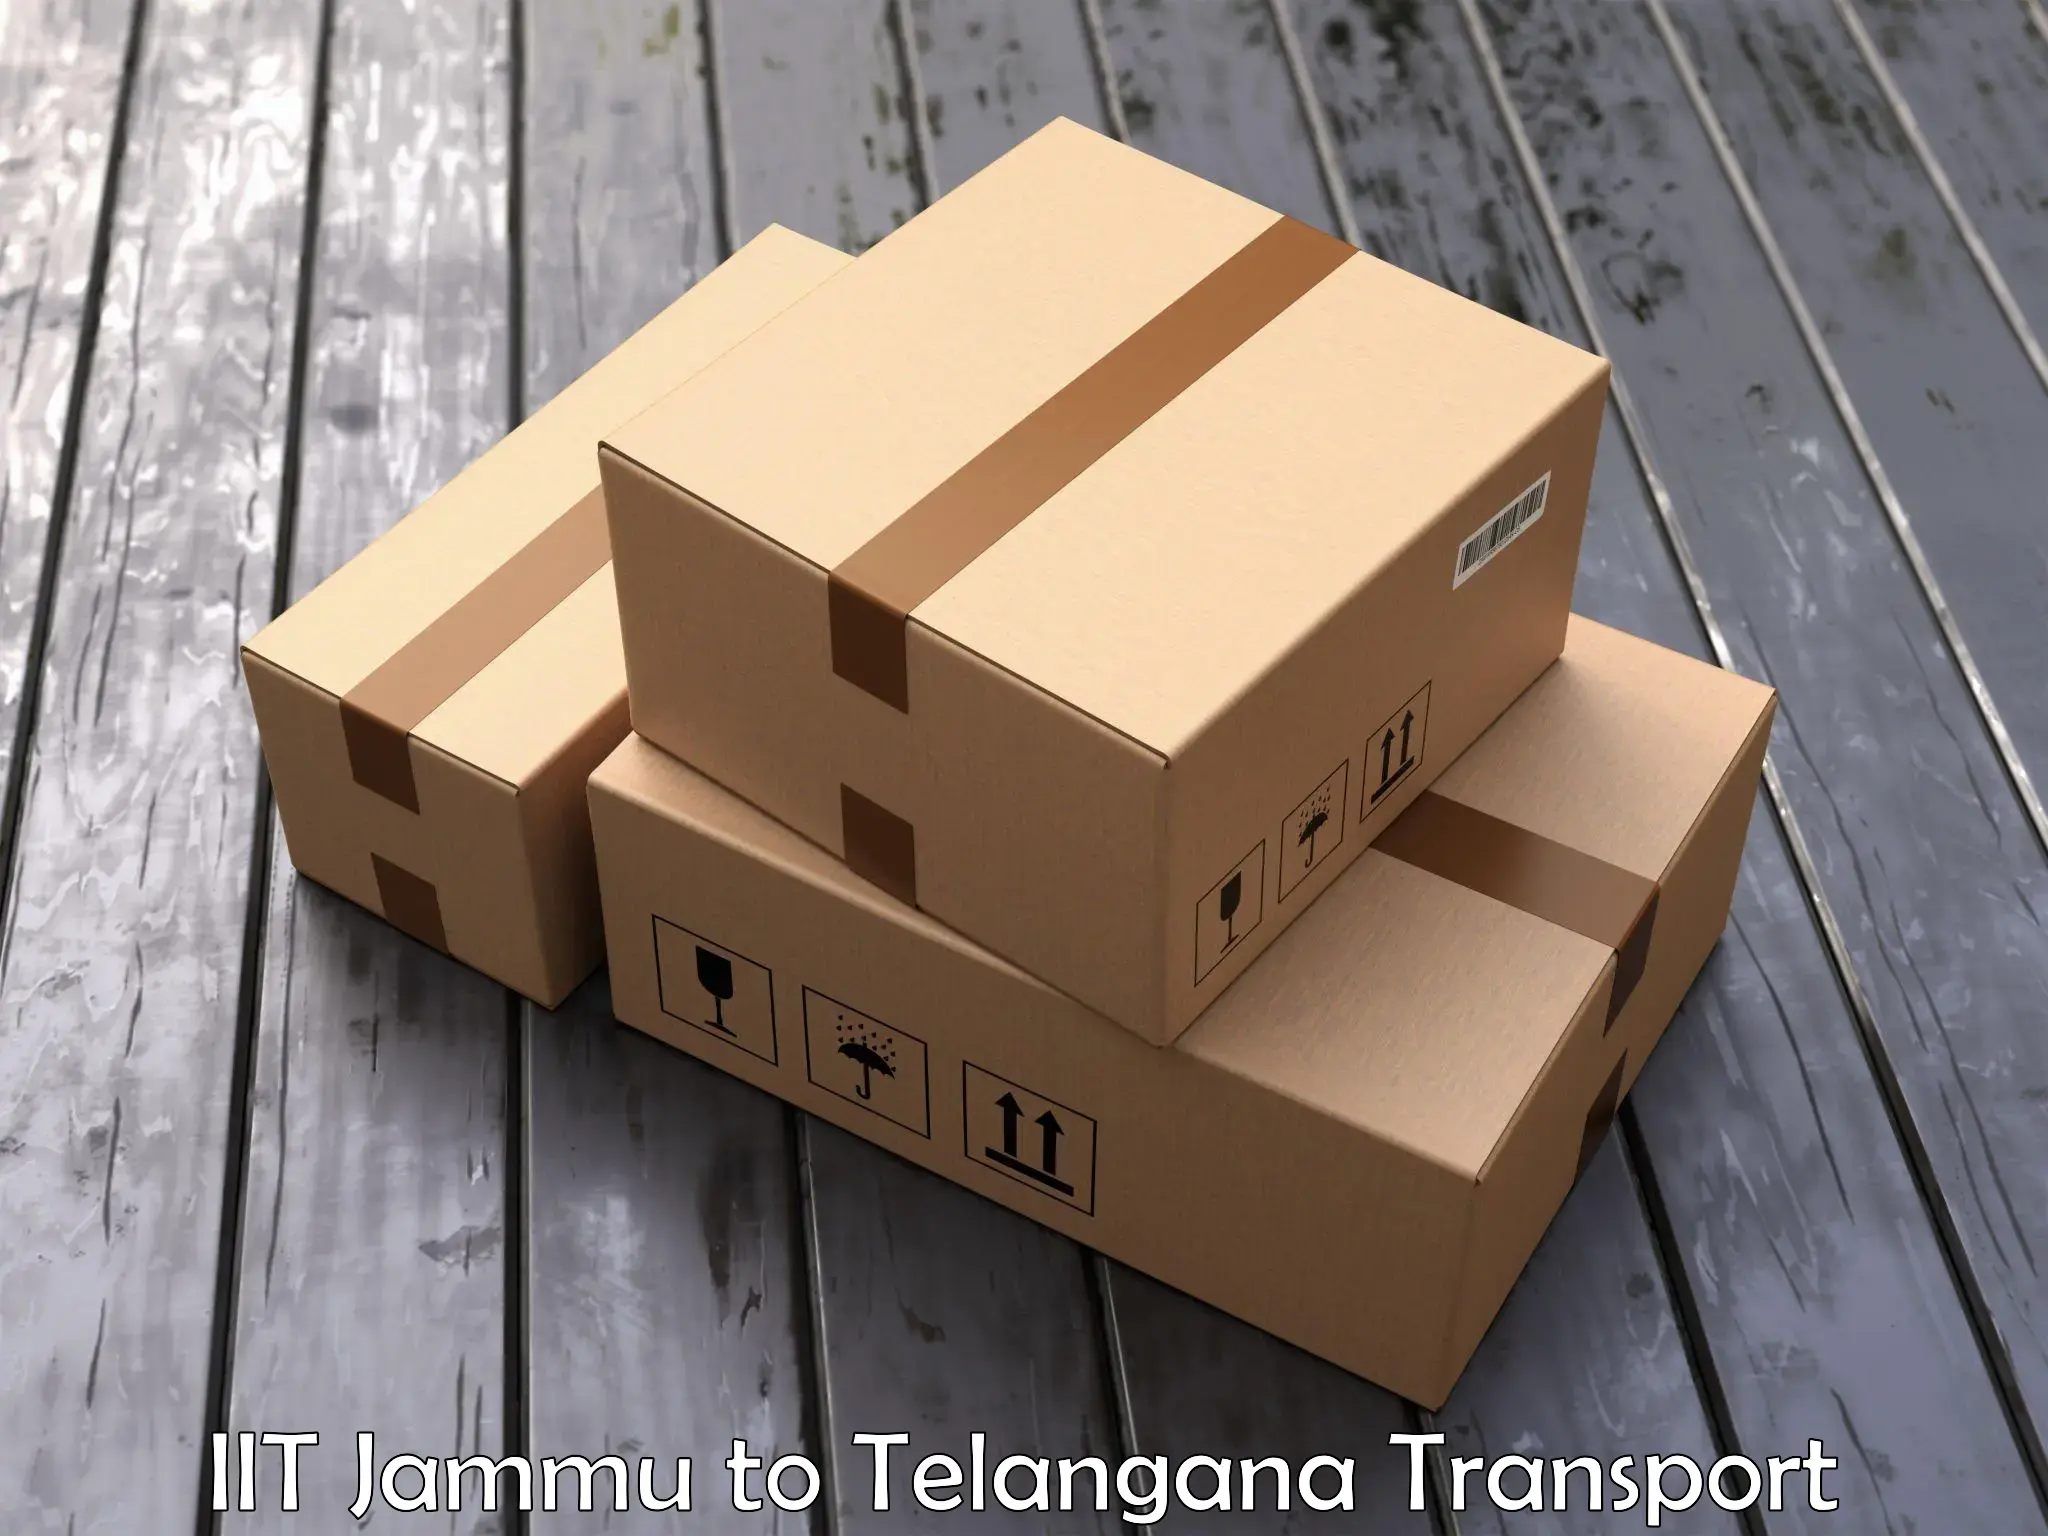 Daily parcel service transport in IIT Jammu to International Institute of Information Technology Hyderabad